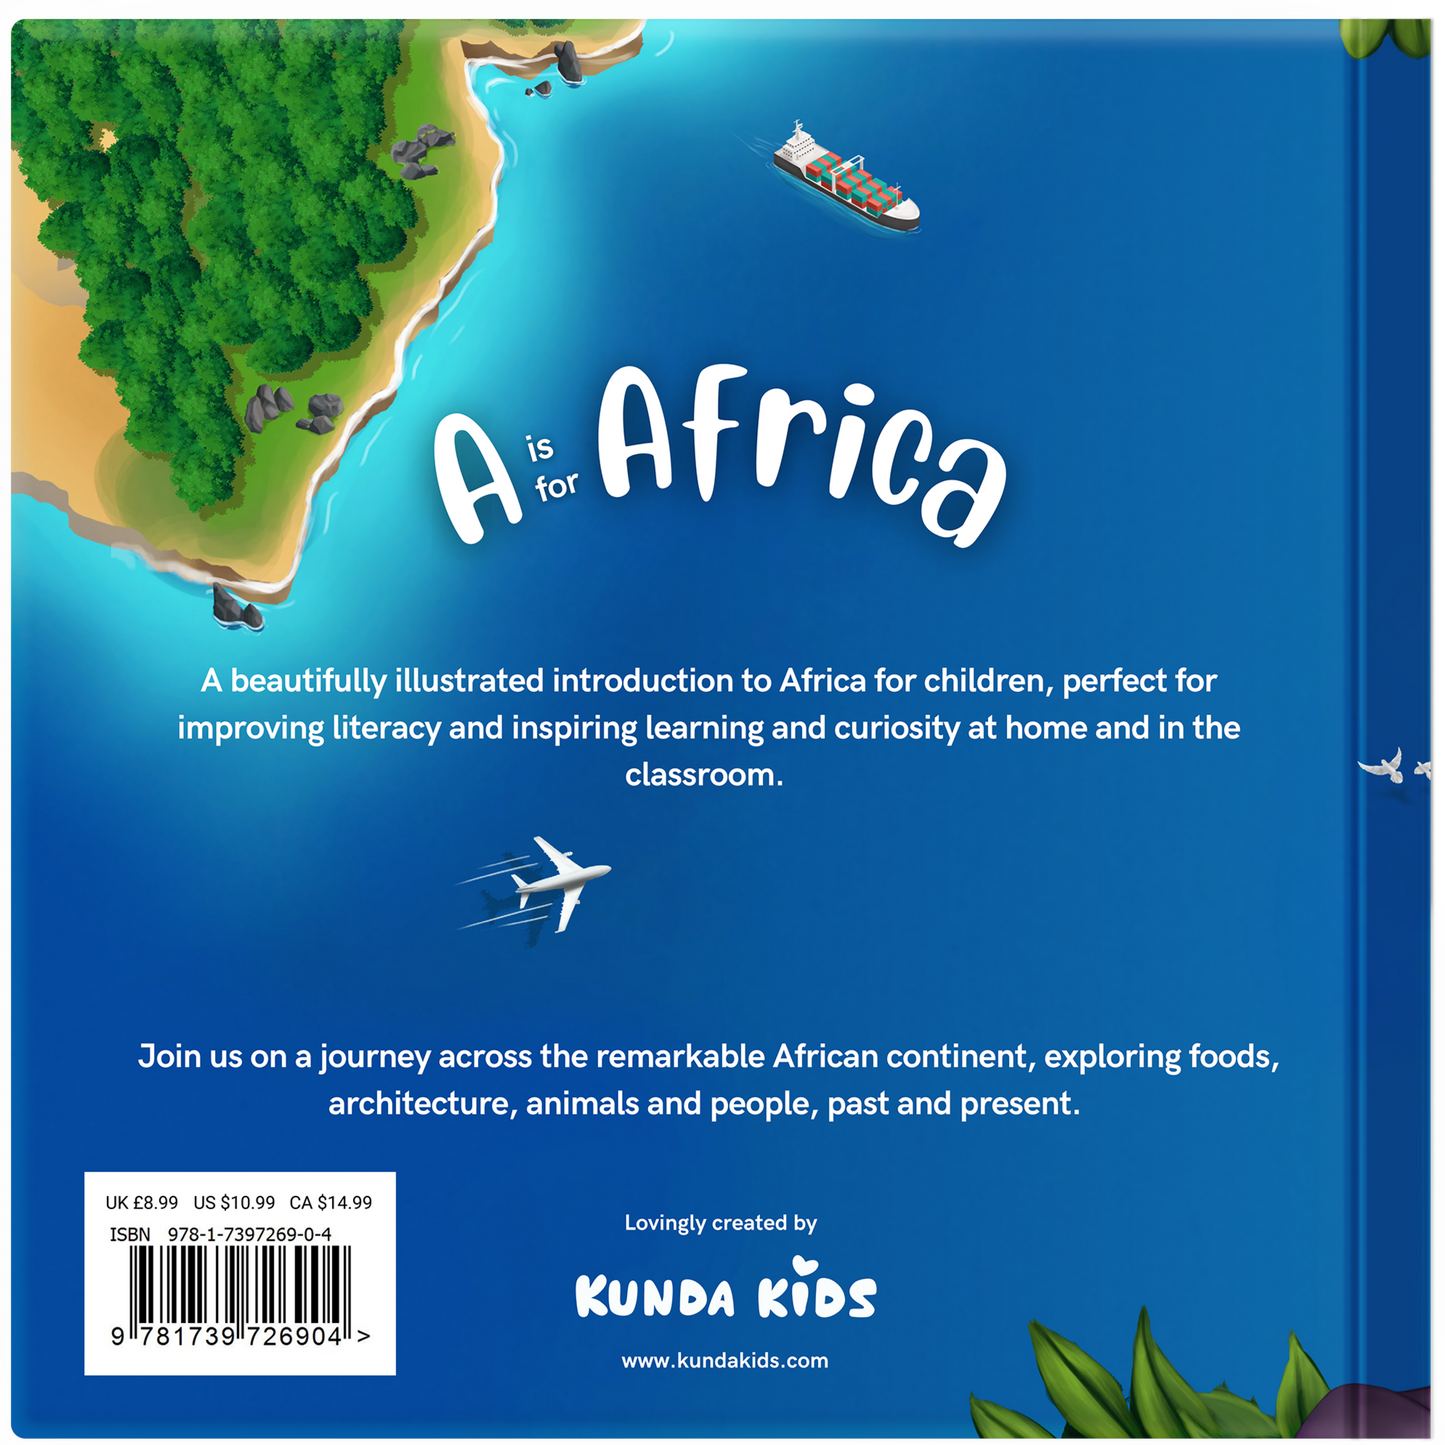 Kunda Kids, A is for Africa